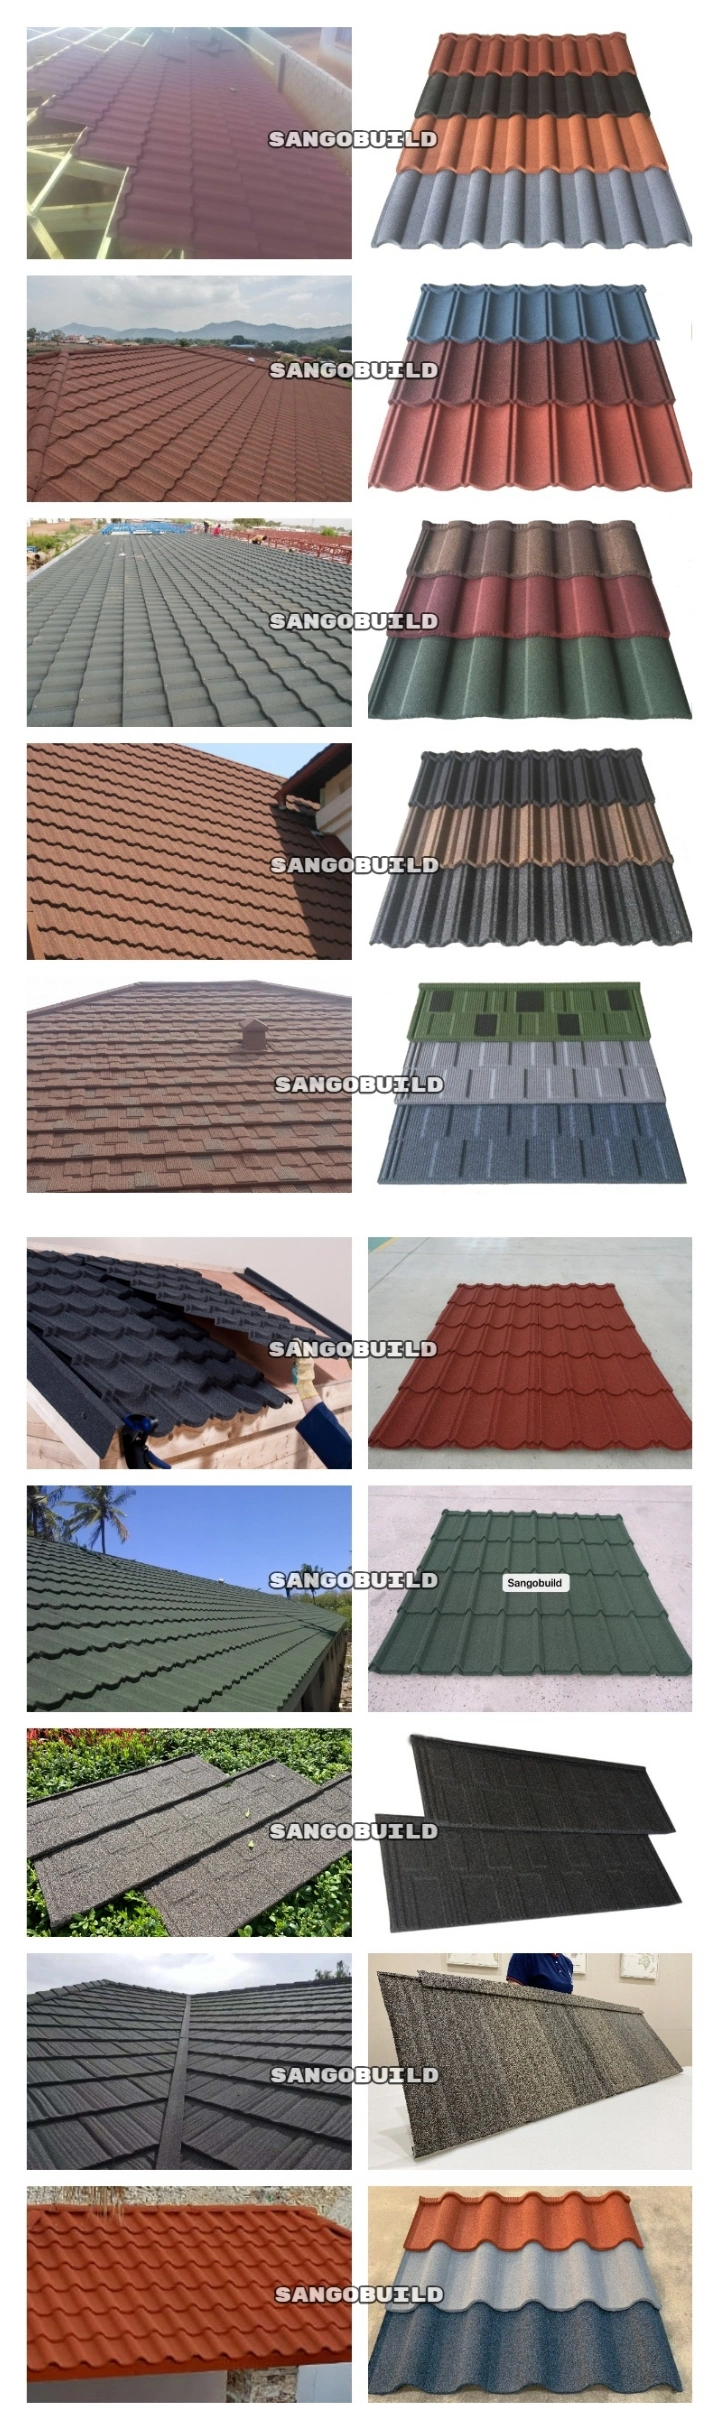 West Africa Roofing Sheets Nigeria Aluminum Zinc Metal Stone Coated Steel Roofing Sheets